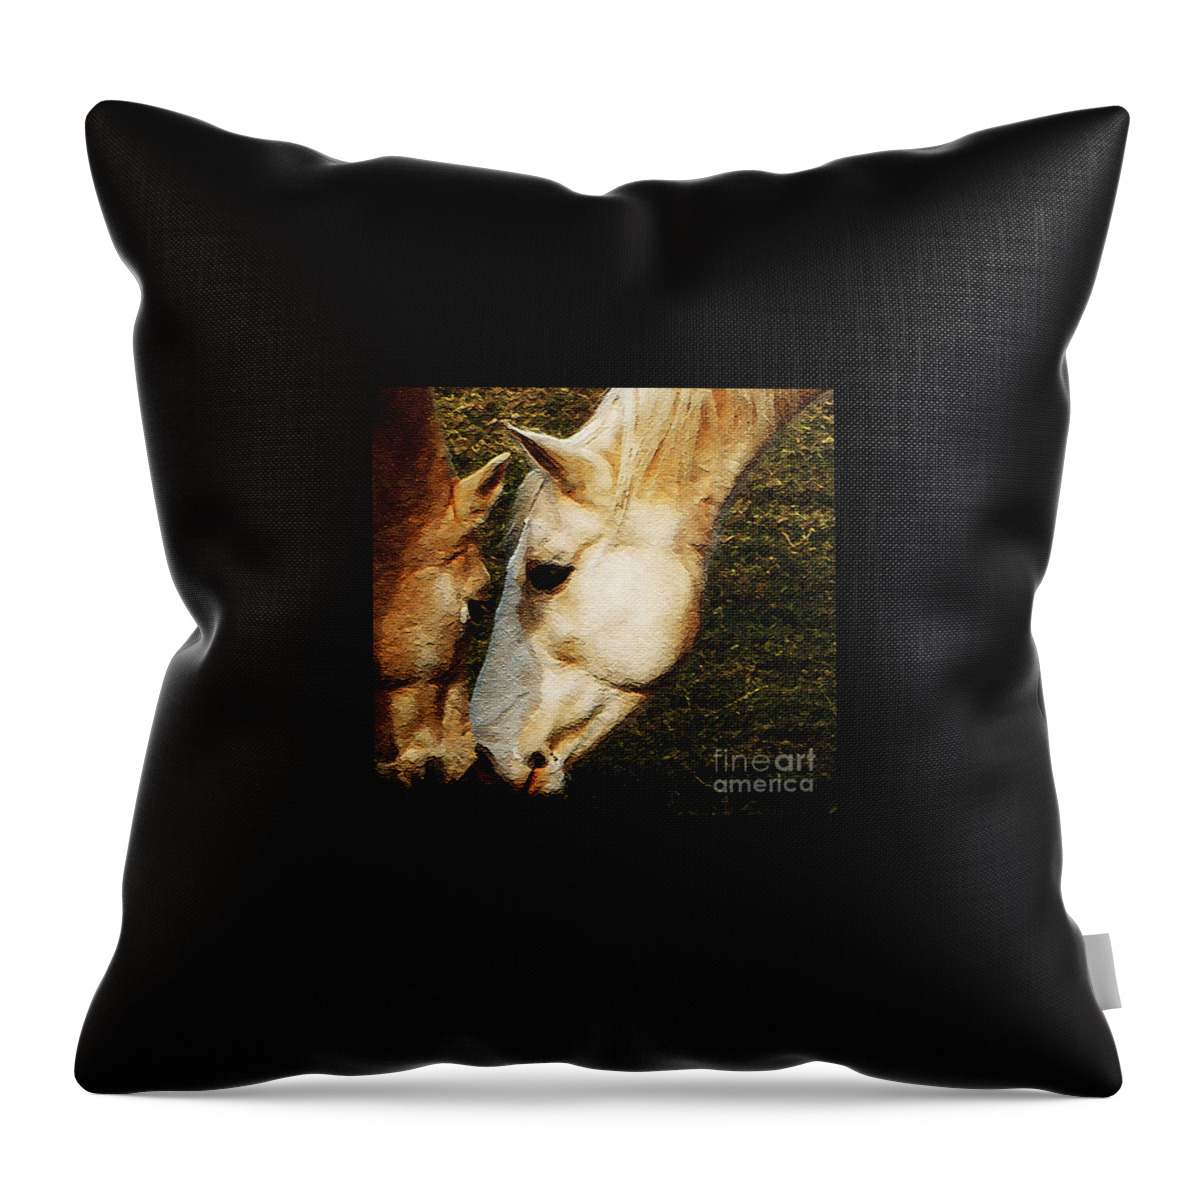 Horses Throw Pillow featuring the photograph Understanding by Linda Shafer